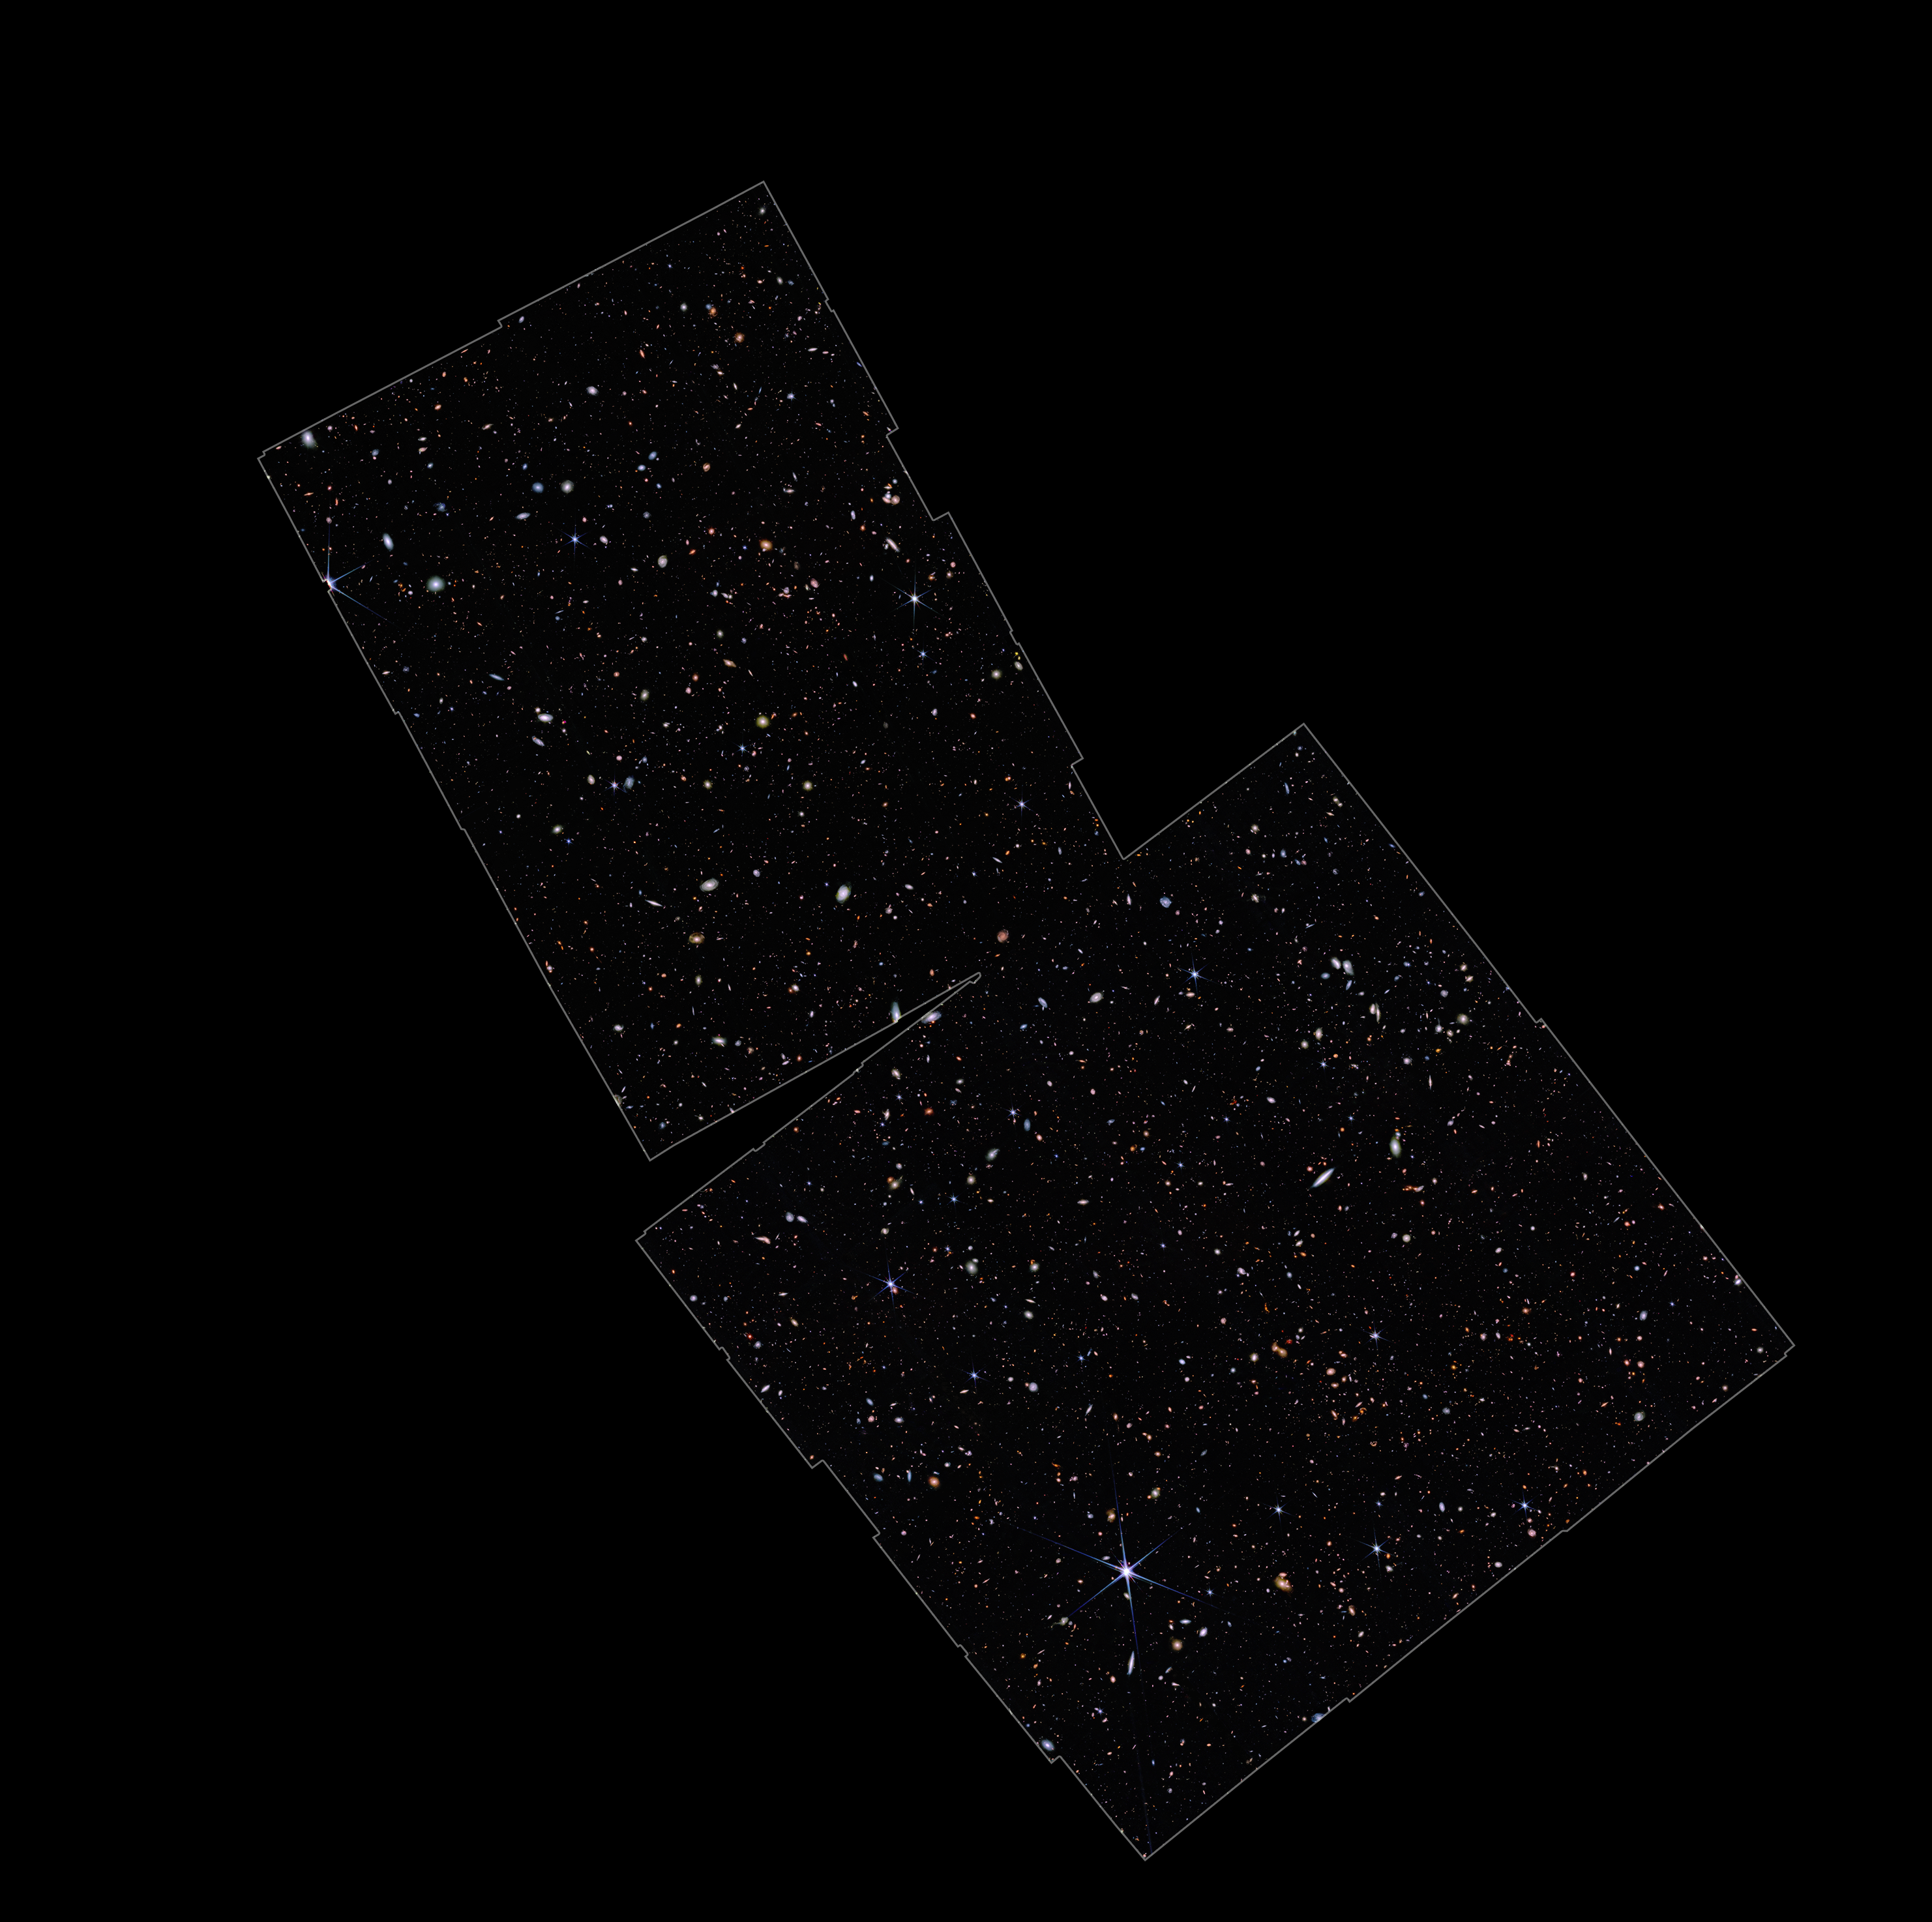 A small patch of the sky observed by the James Webb Space Telescope containing more than 100,000 galaxies 